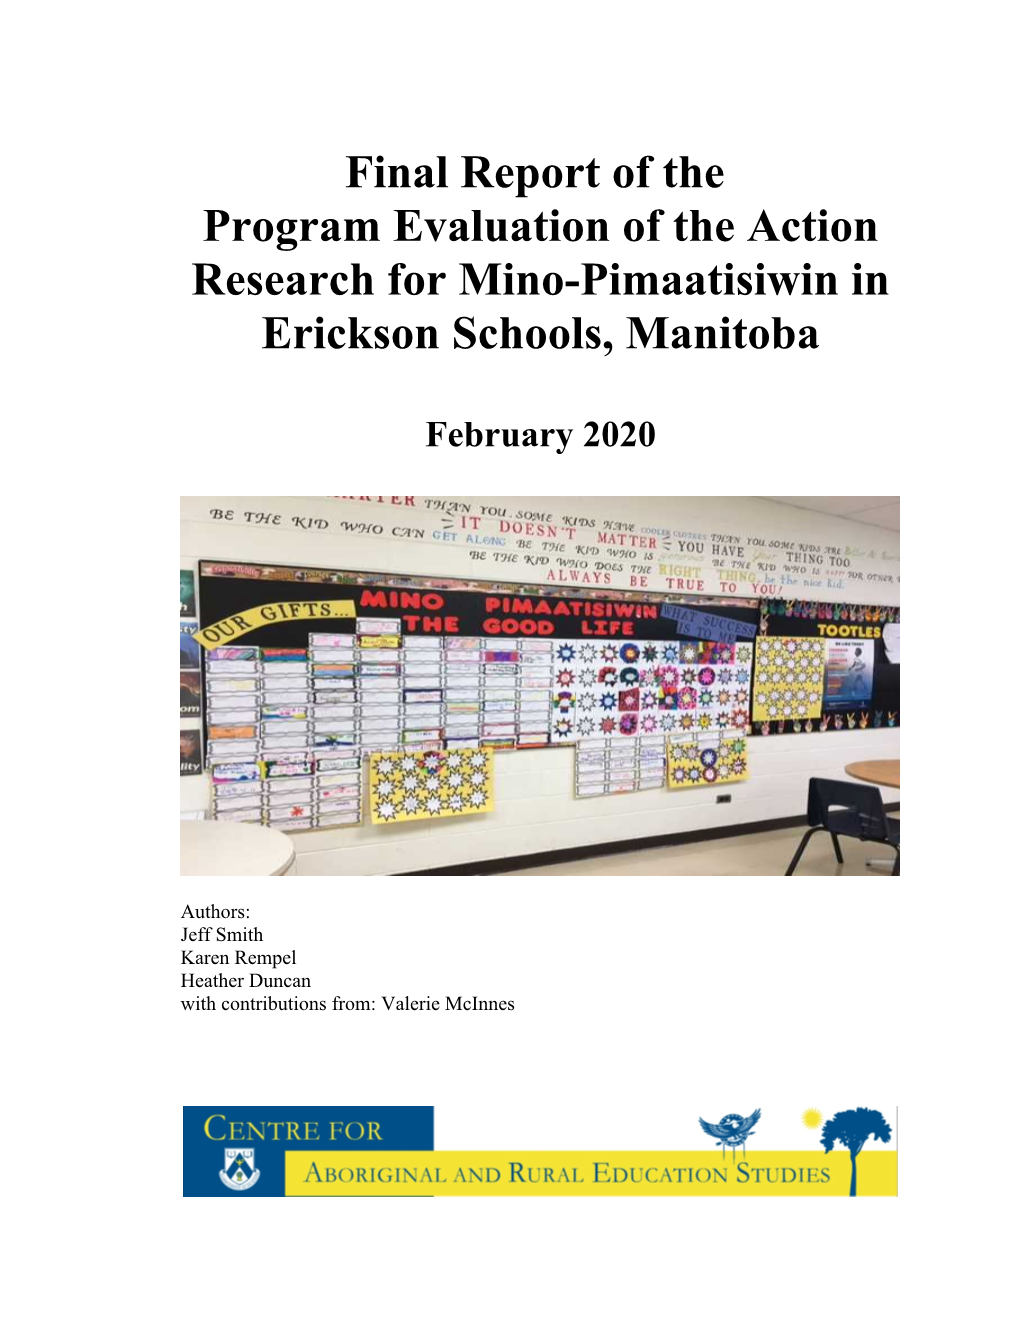 Final Report of the Program Evaluation of the Action Research for Mino-Pimaatisiwin in Erickson Schools, Manitoba